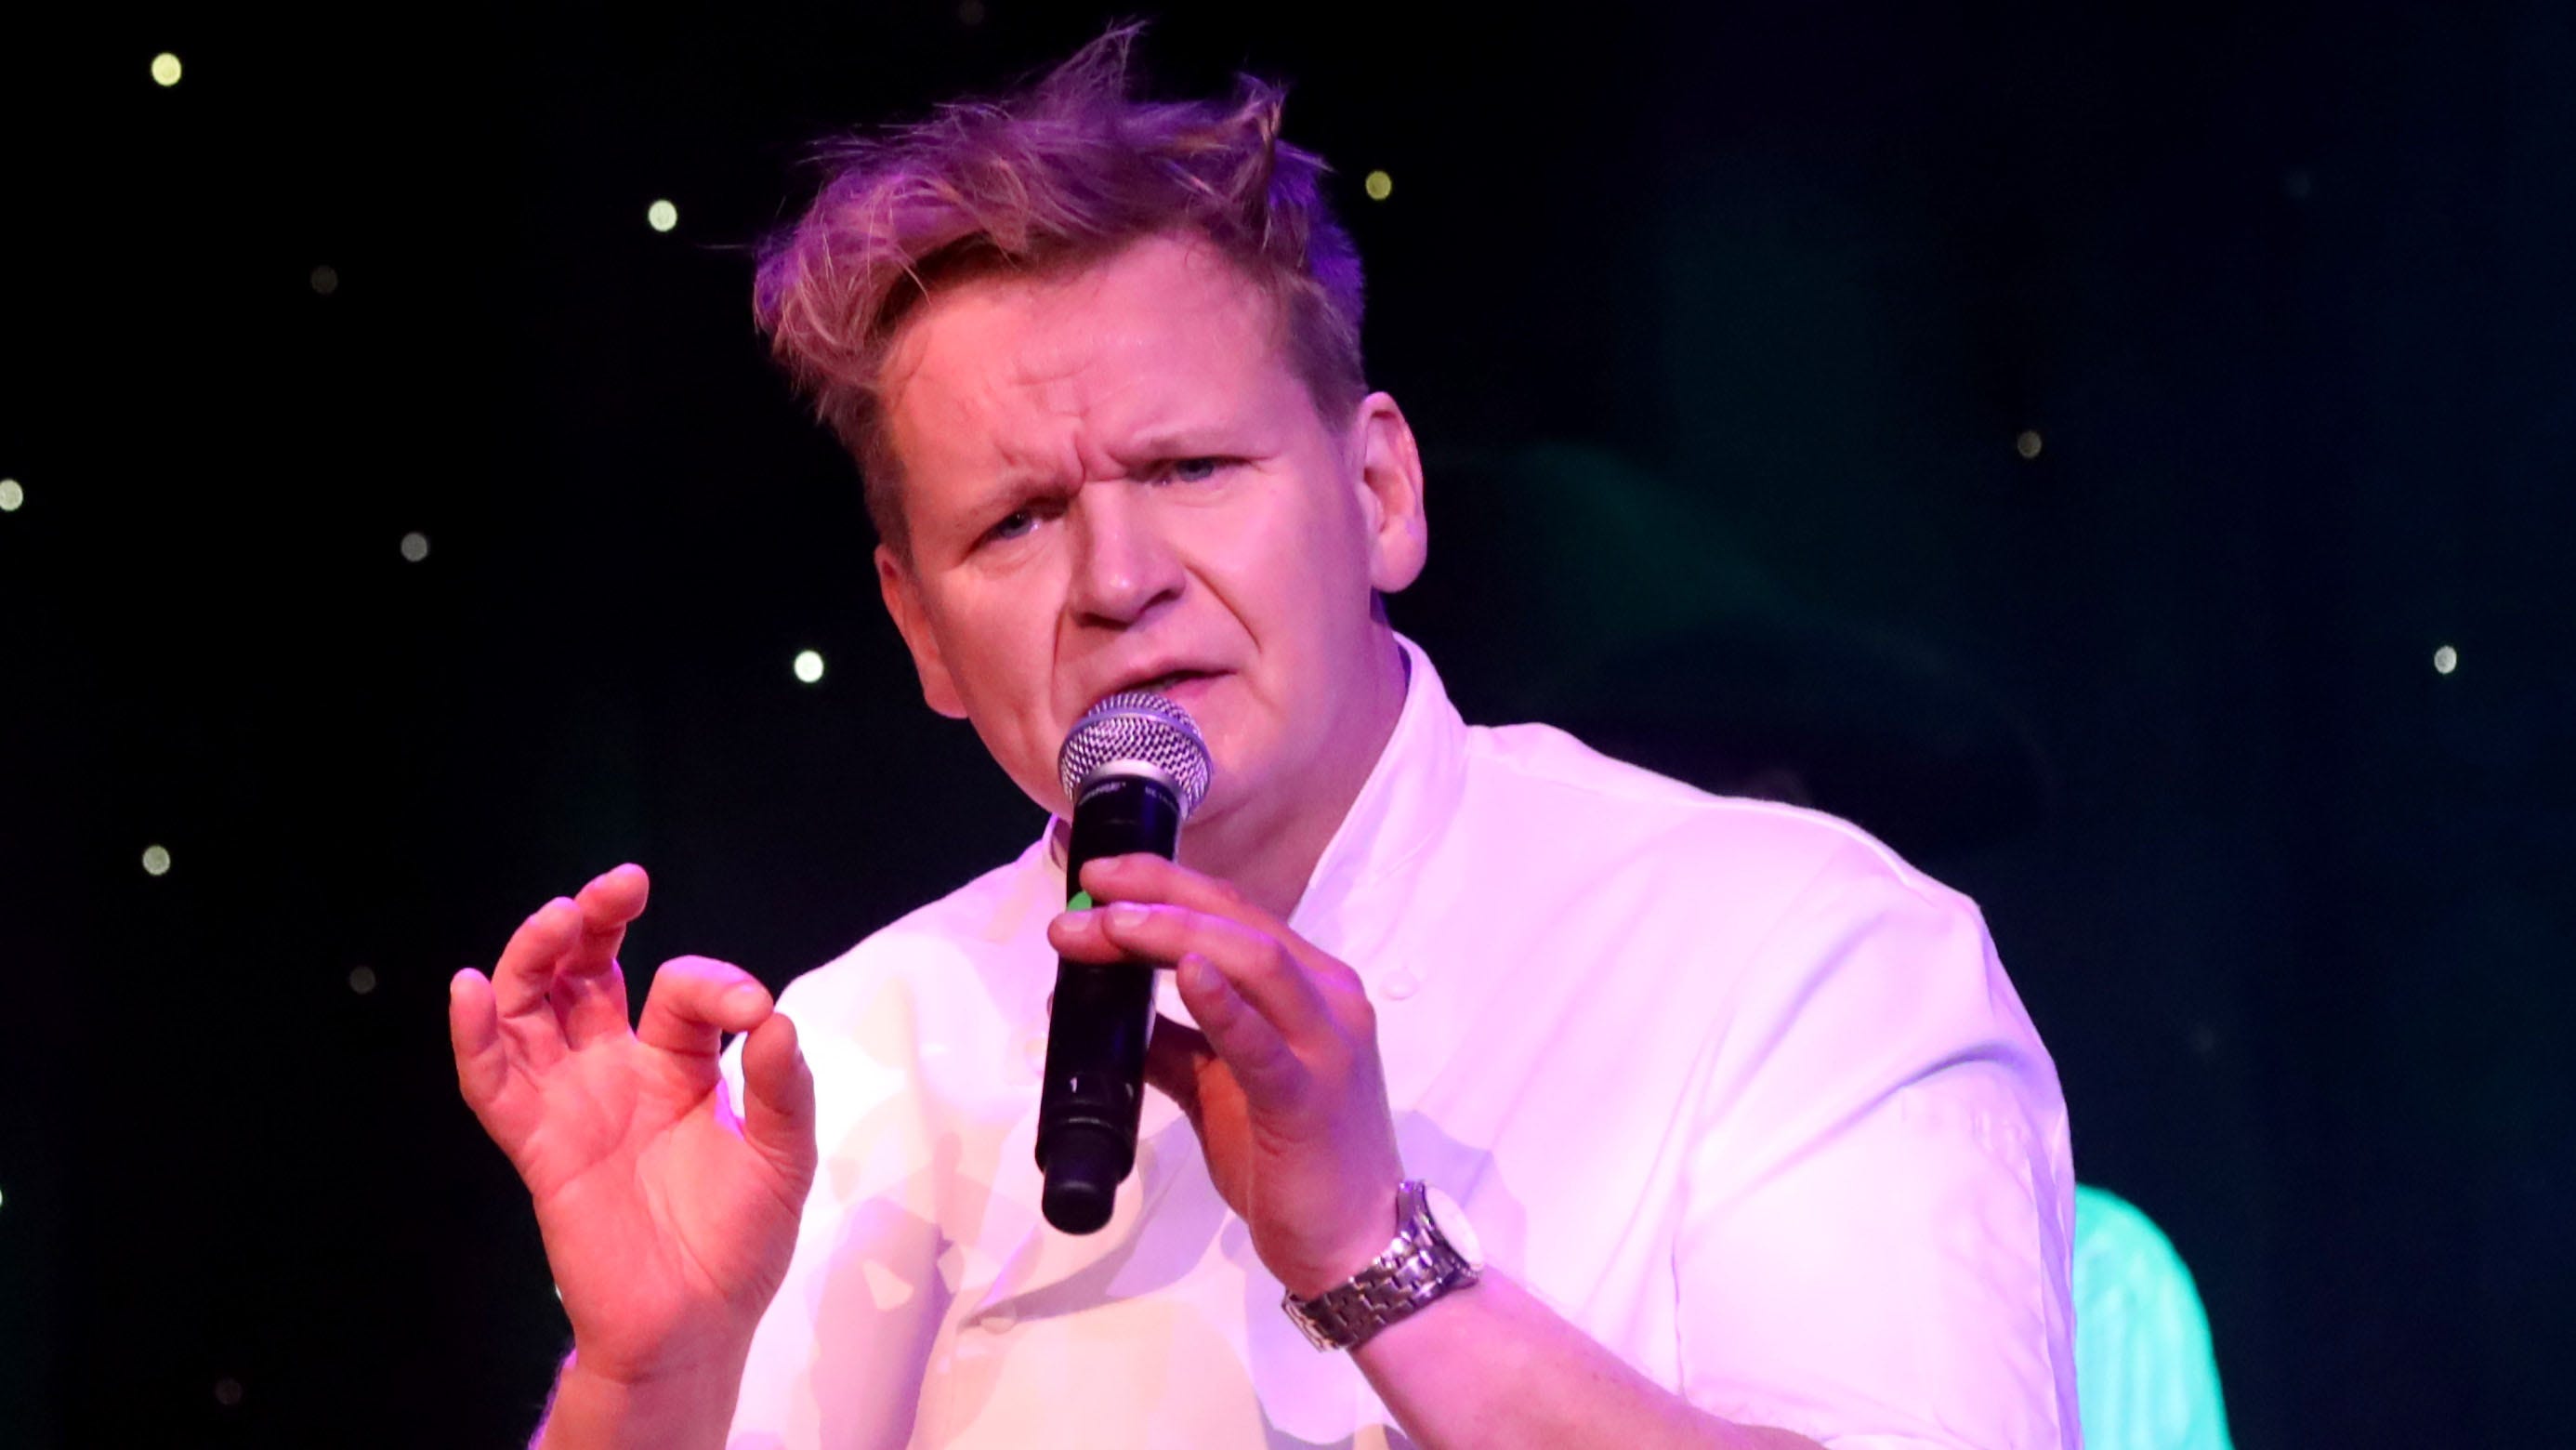 FOX NEWS: Gordon Ramsay’s new restaurant will have $106 burger – and the fries cost extra November 28, 2020 at 04:25AM